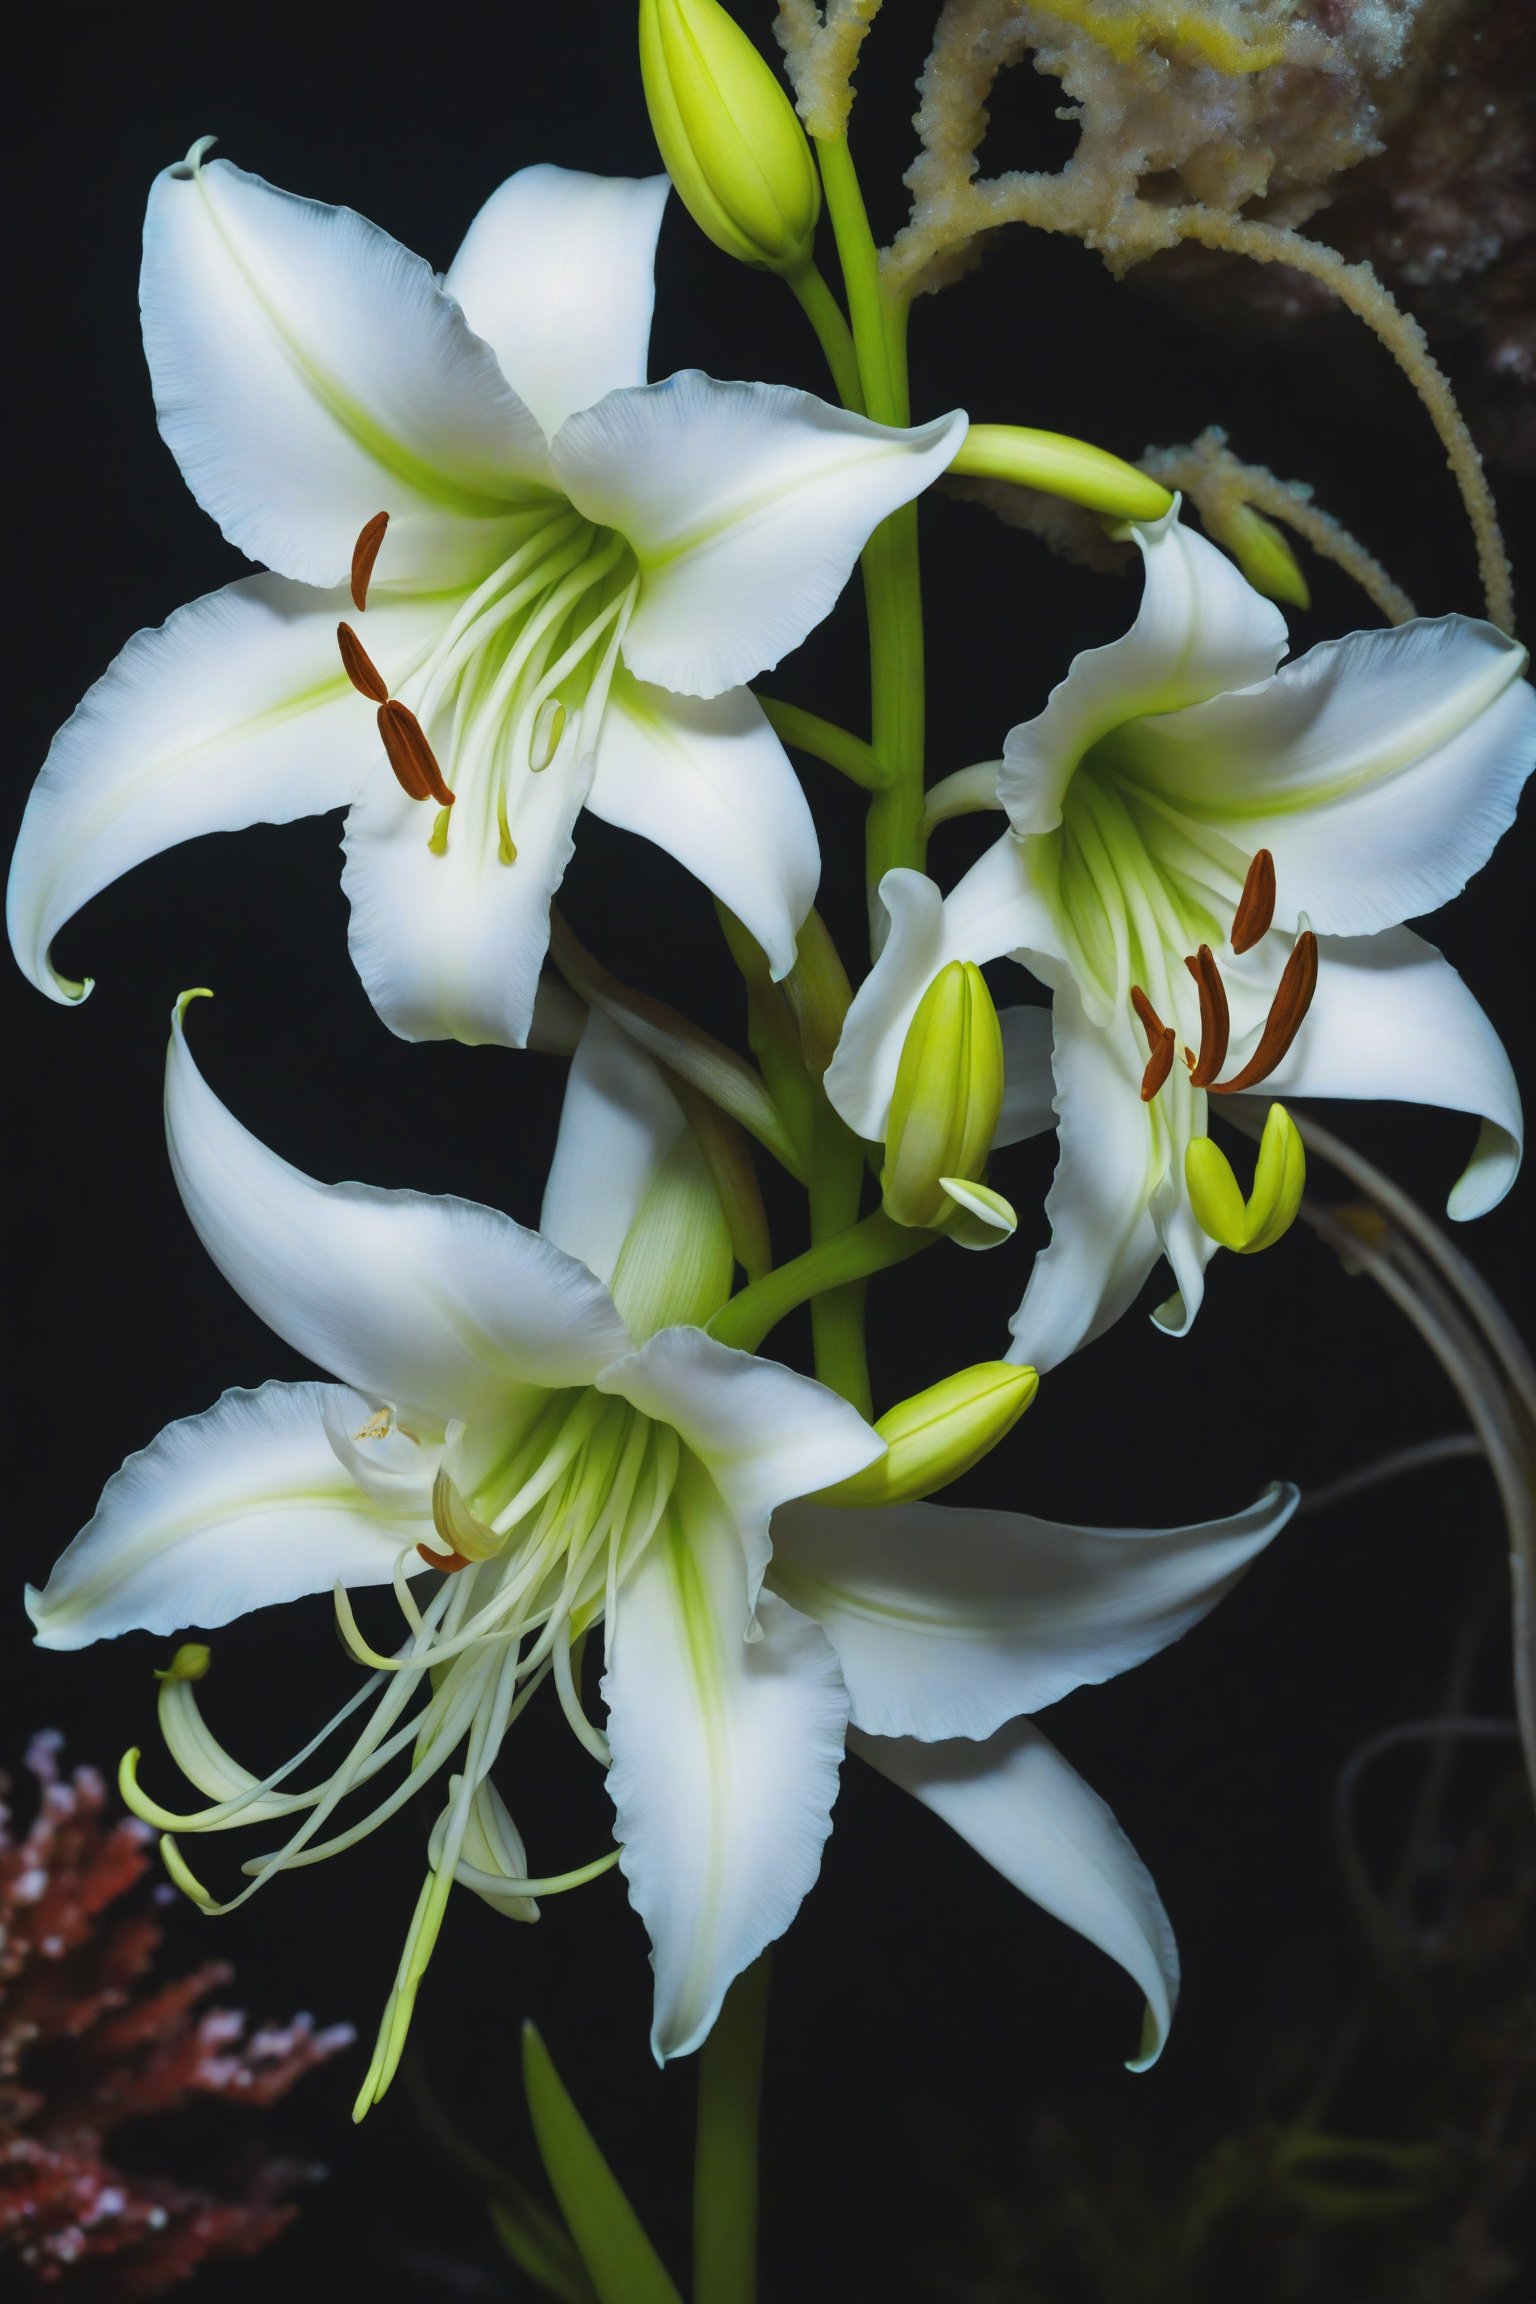 Abyssal Lily of the Depths: Its white flowers glow in the darkness of the marine abyss, attracting bold explorers with its sweet yet unfamiliar scent.